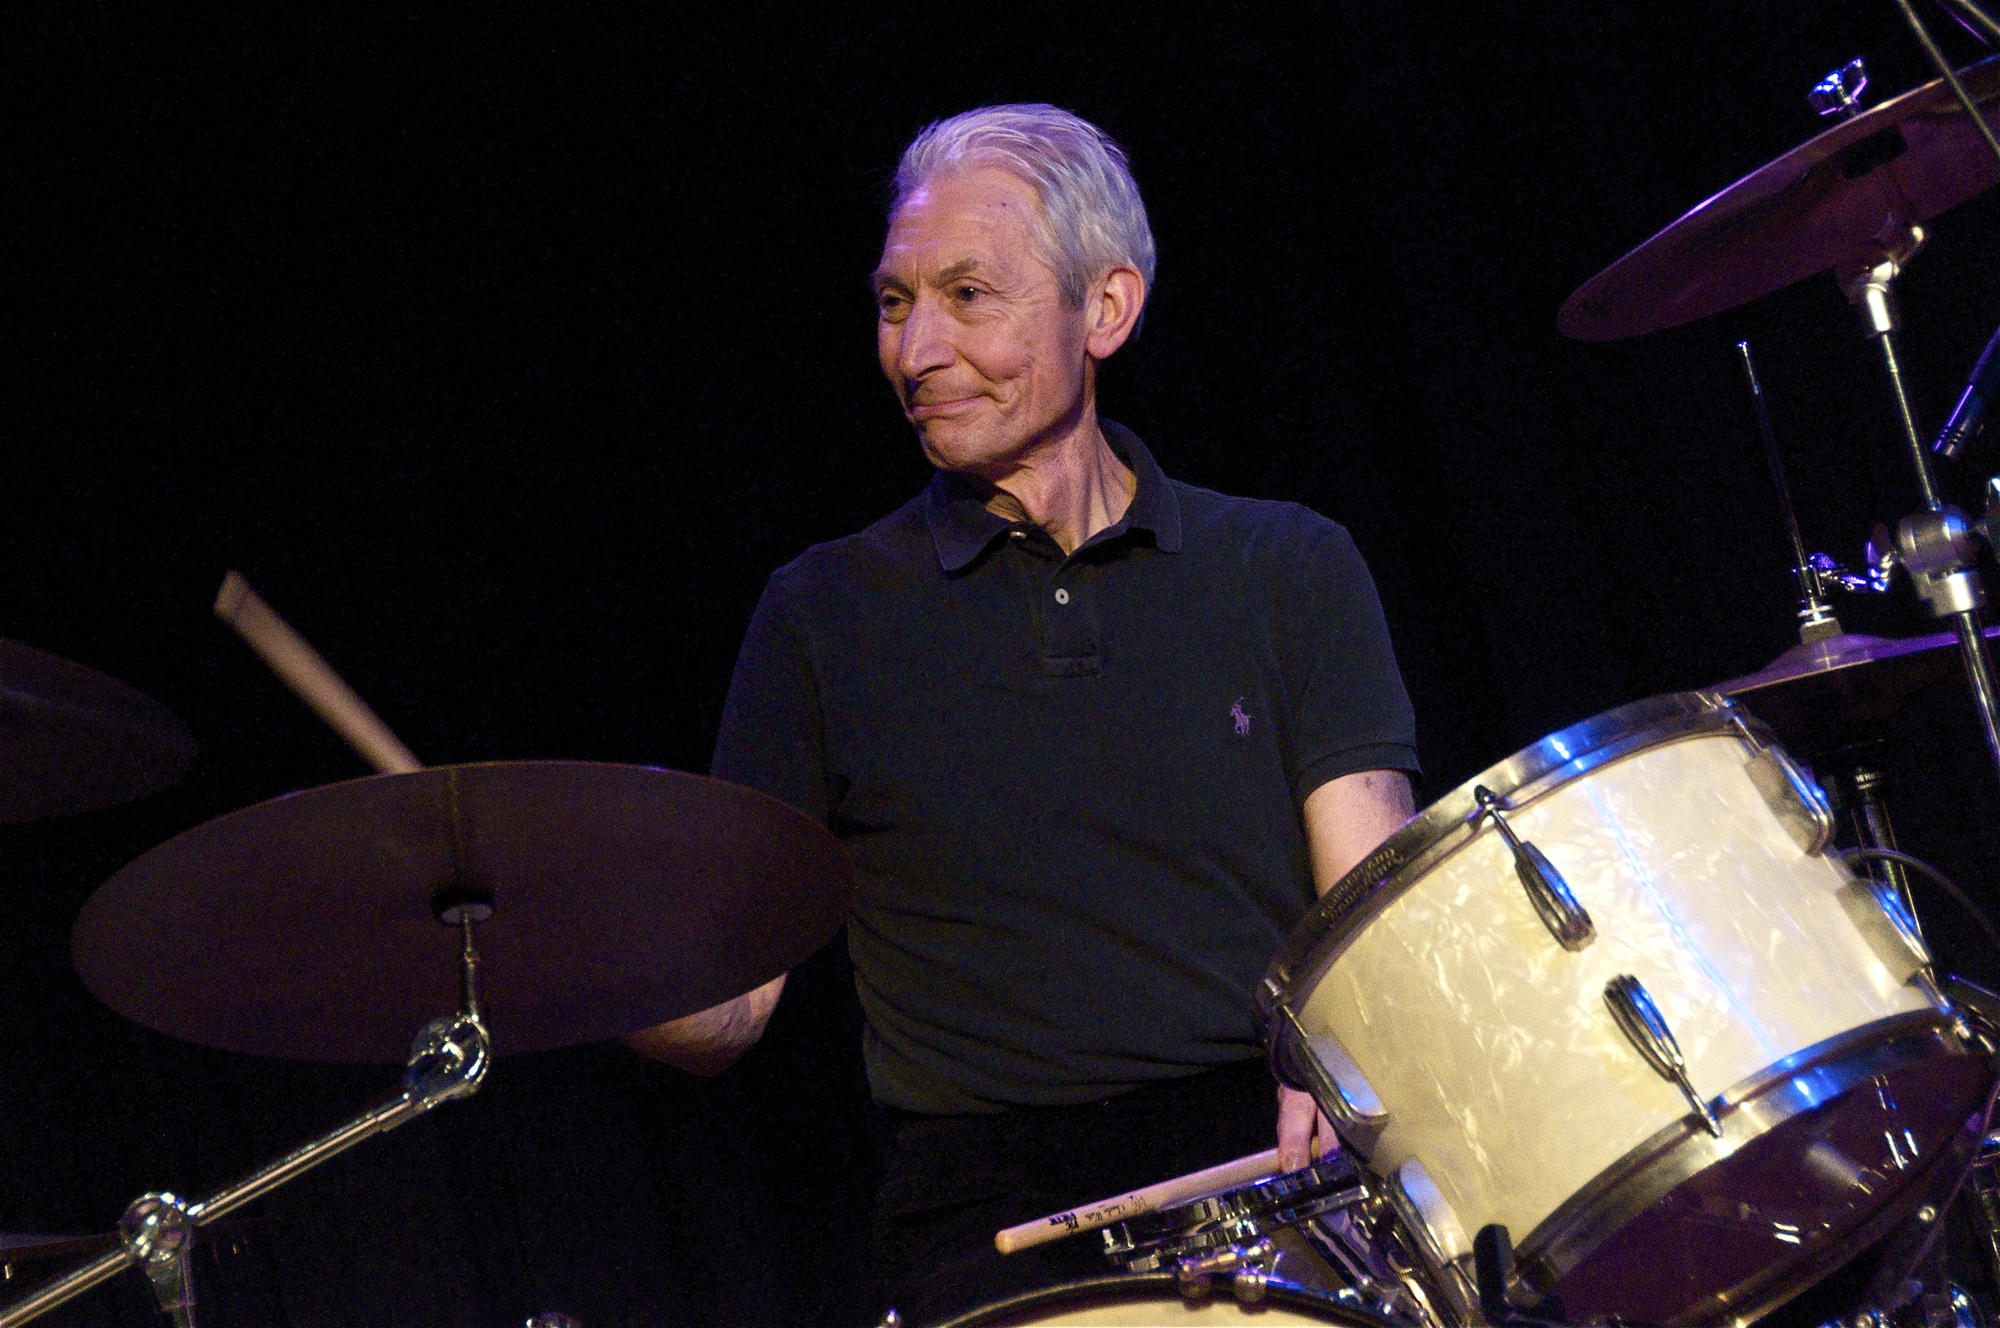 a man with gray hair is playing drums